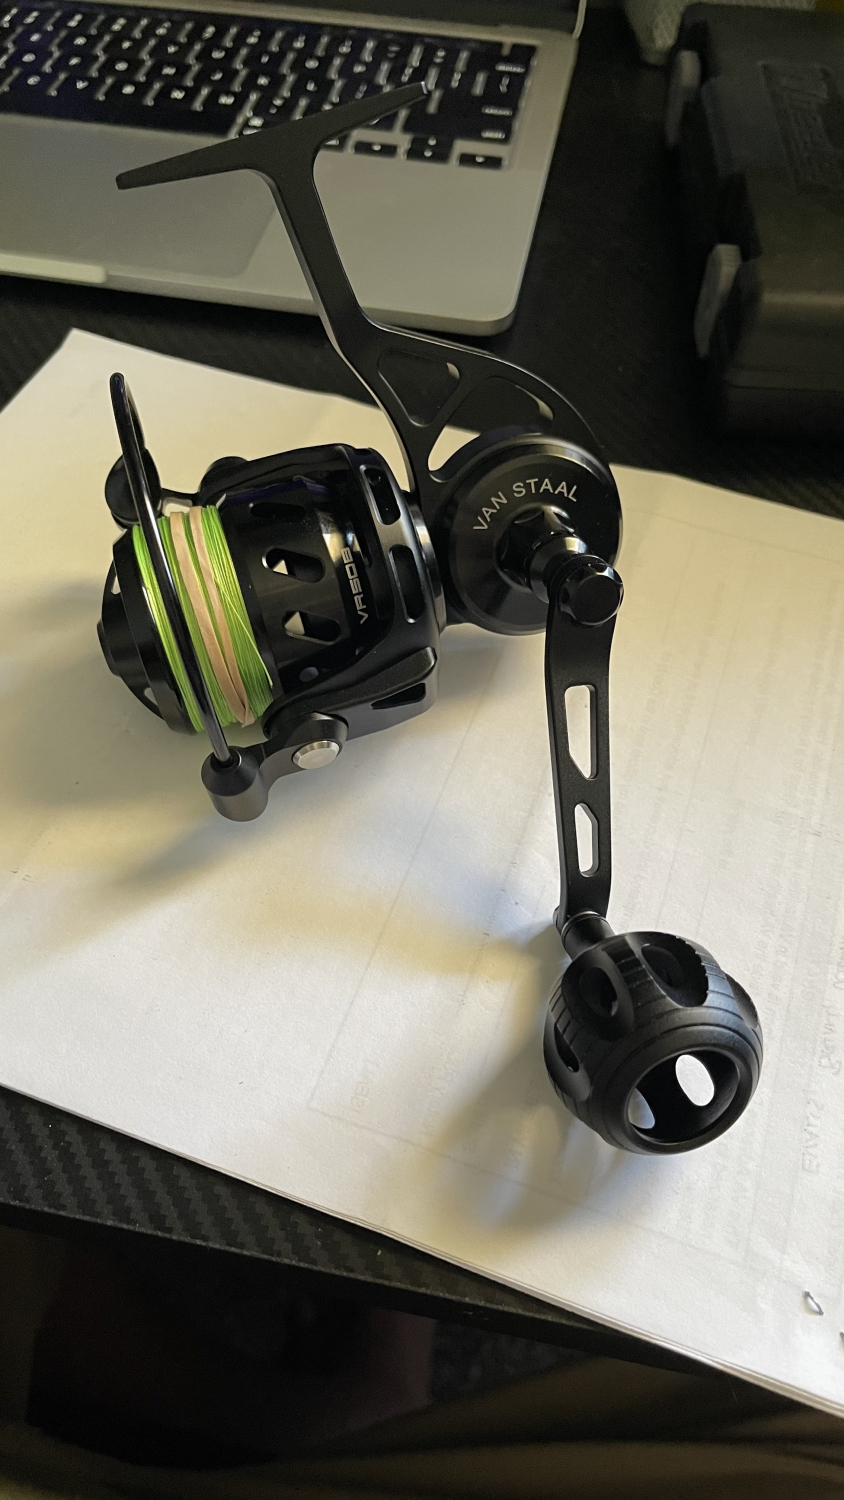 Van Staal VR150 Spinning Reel - Silver - TackleDirect